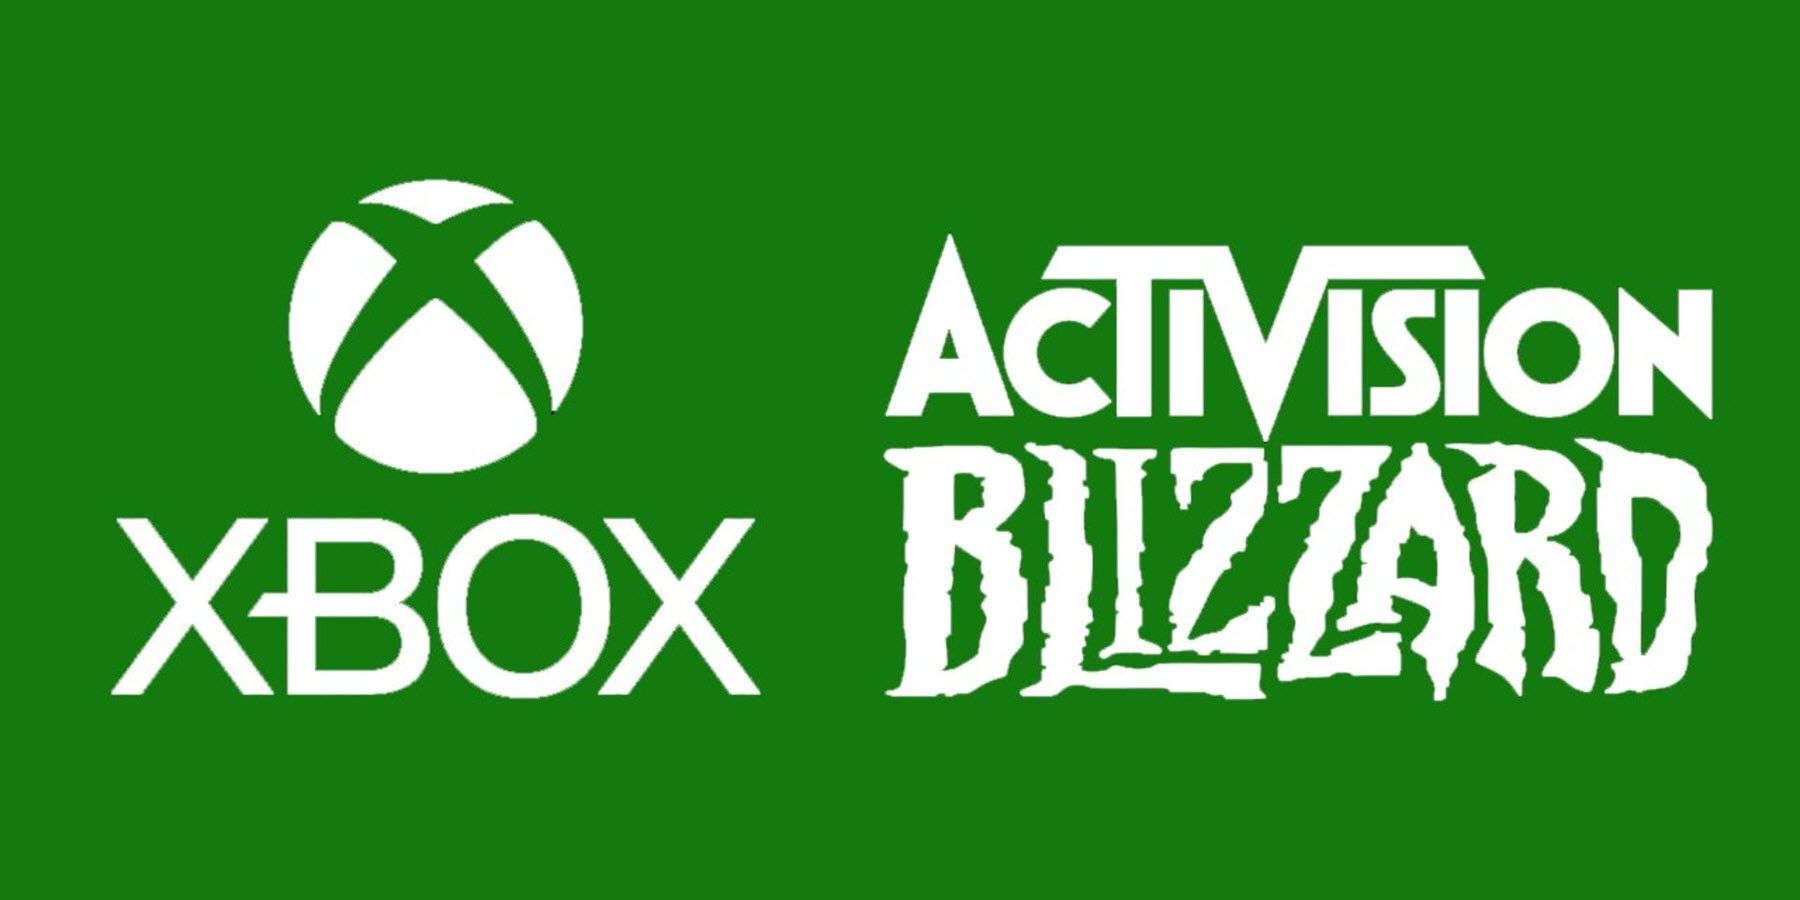 microsoft sued over activision